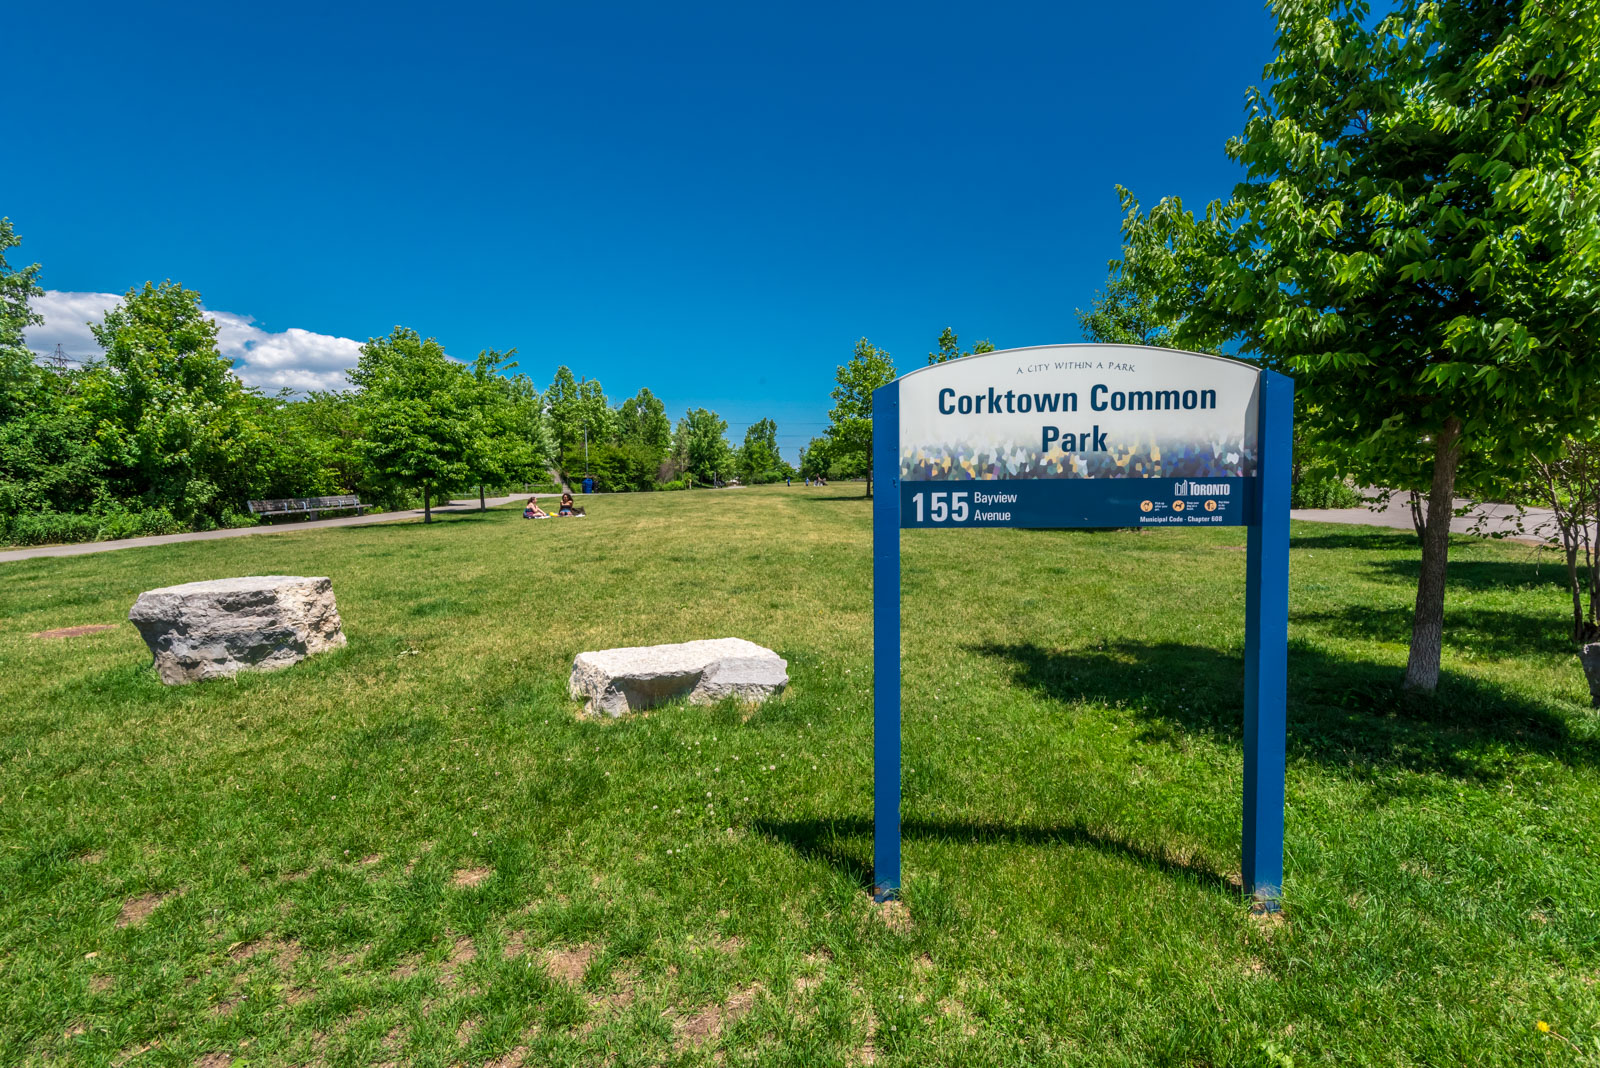 Picture showing Corktown Common Park and people. We see the park sign and also beautiful green grass.